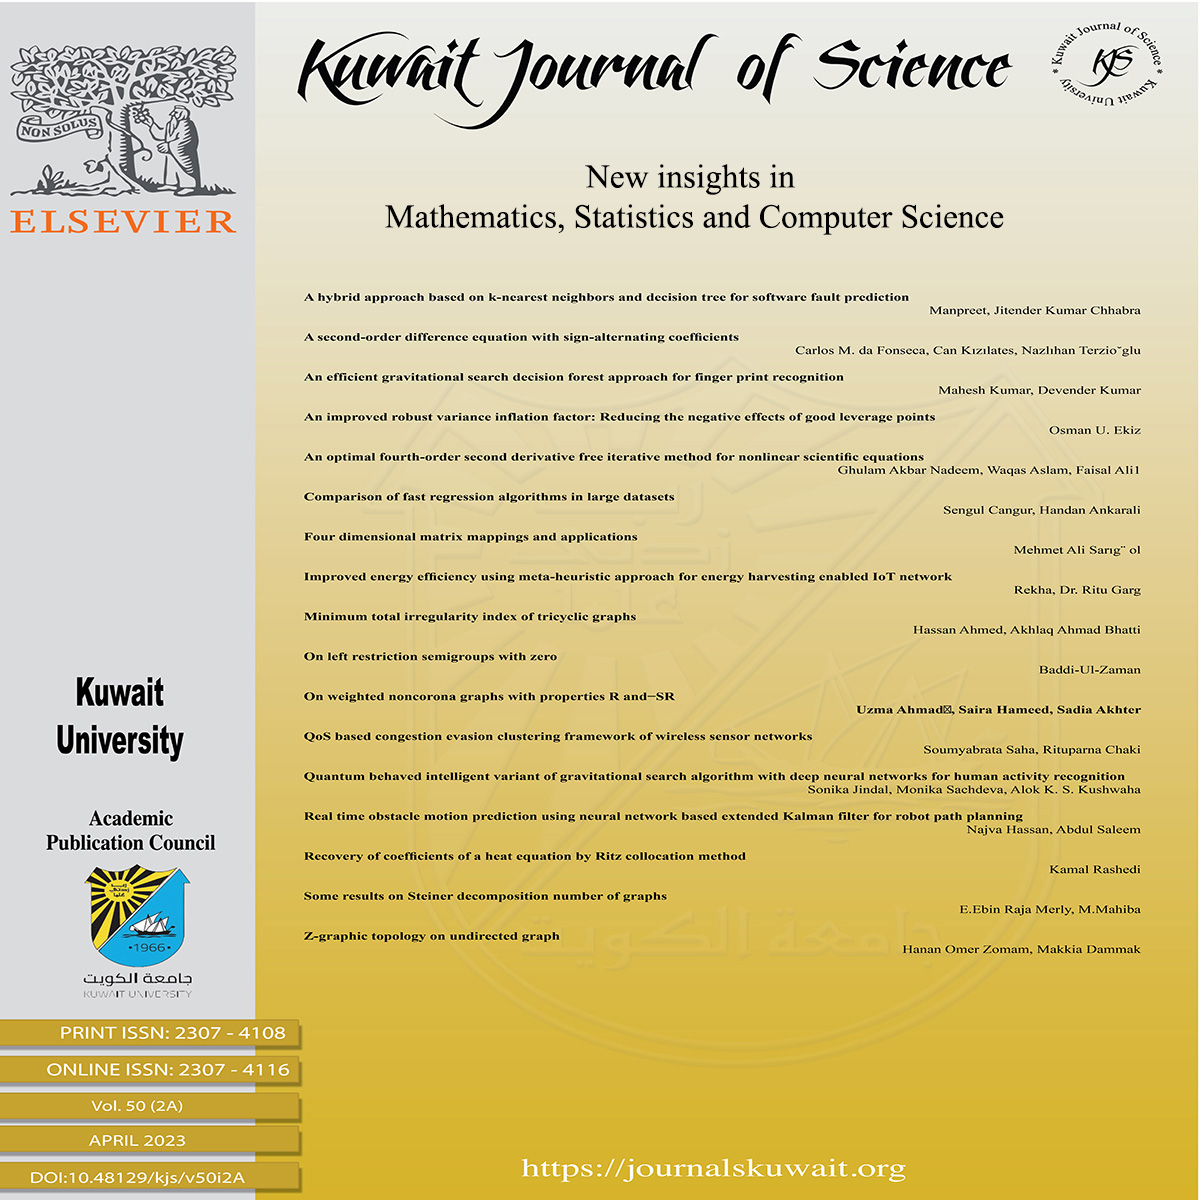 					View Vol. 50 No. 2A (2023): Kuwait Journal of Science
				